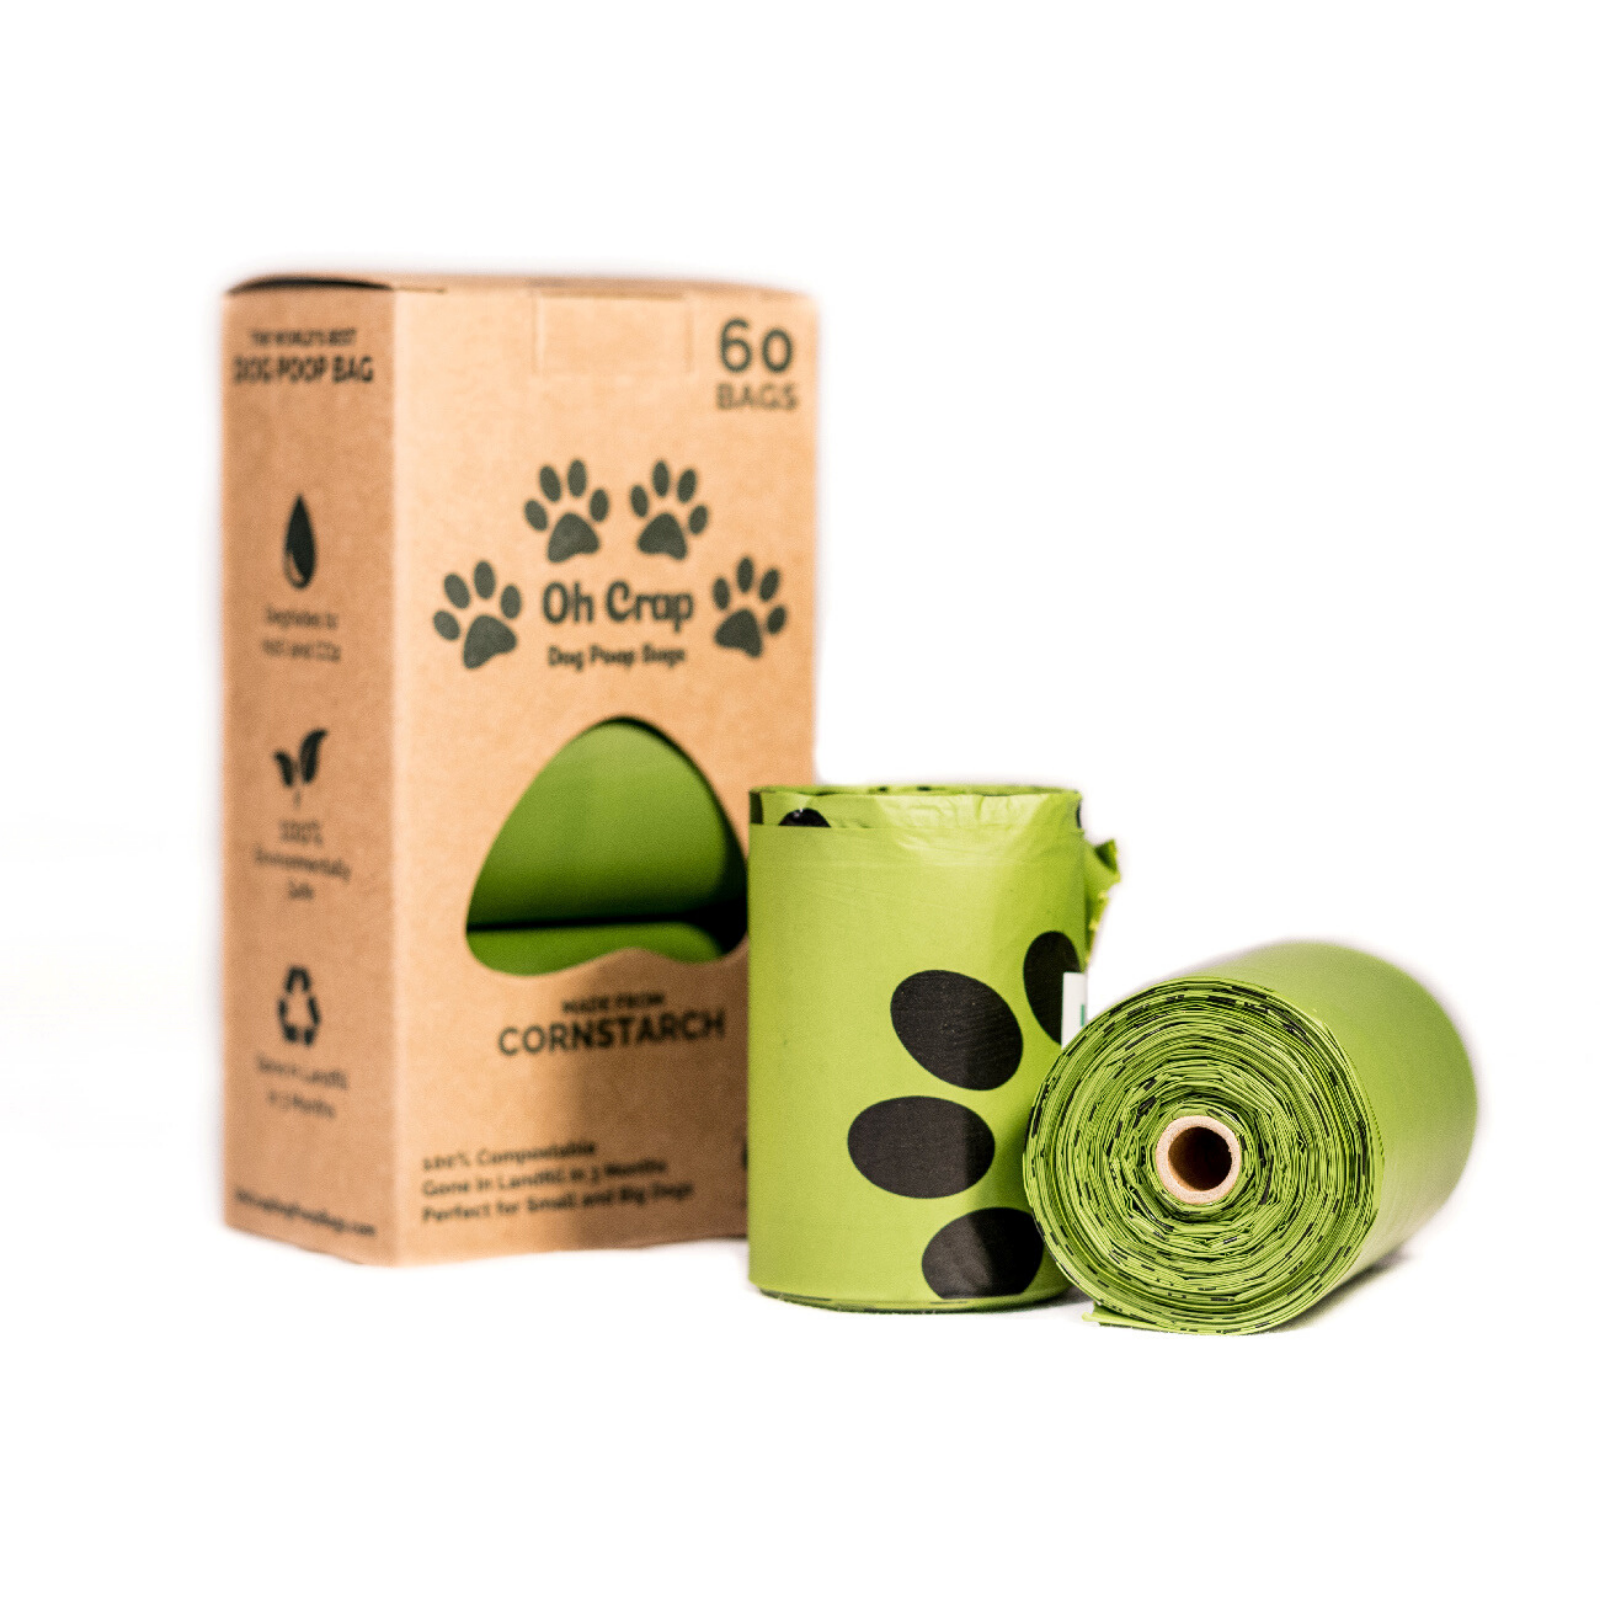 OH CRAP Dog Poop Bags, Non-Plastic & Compostable 3 Pack 60 bags